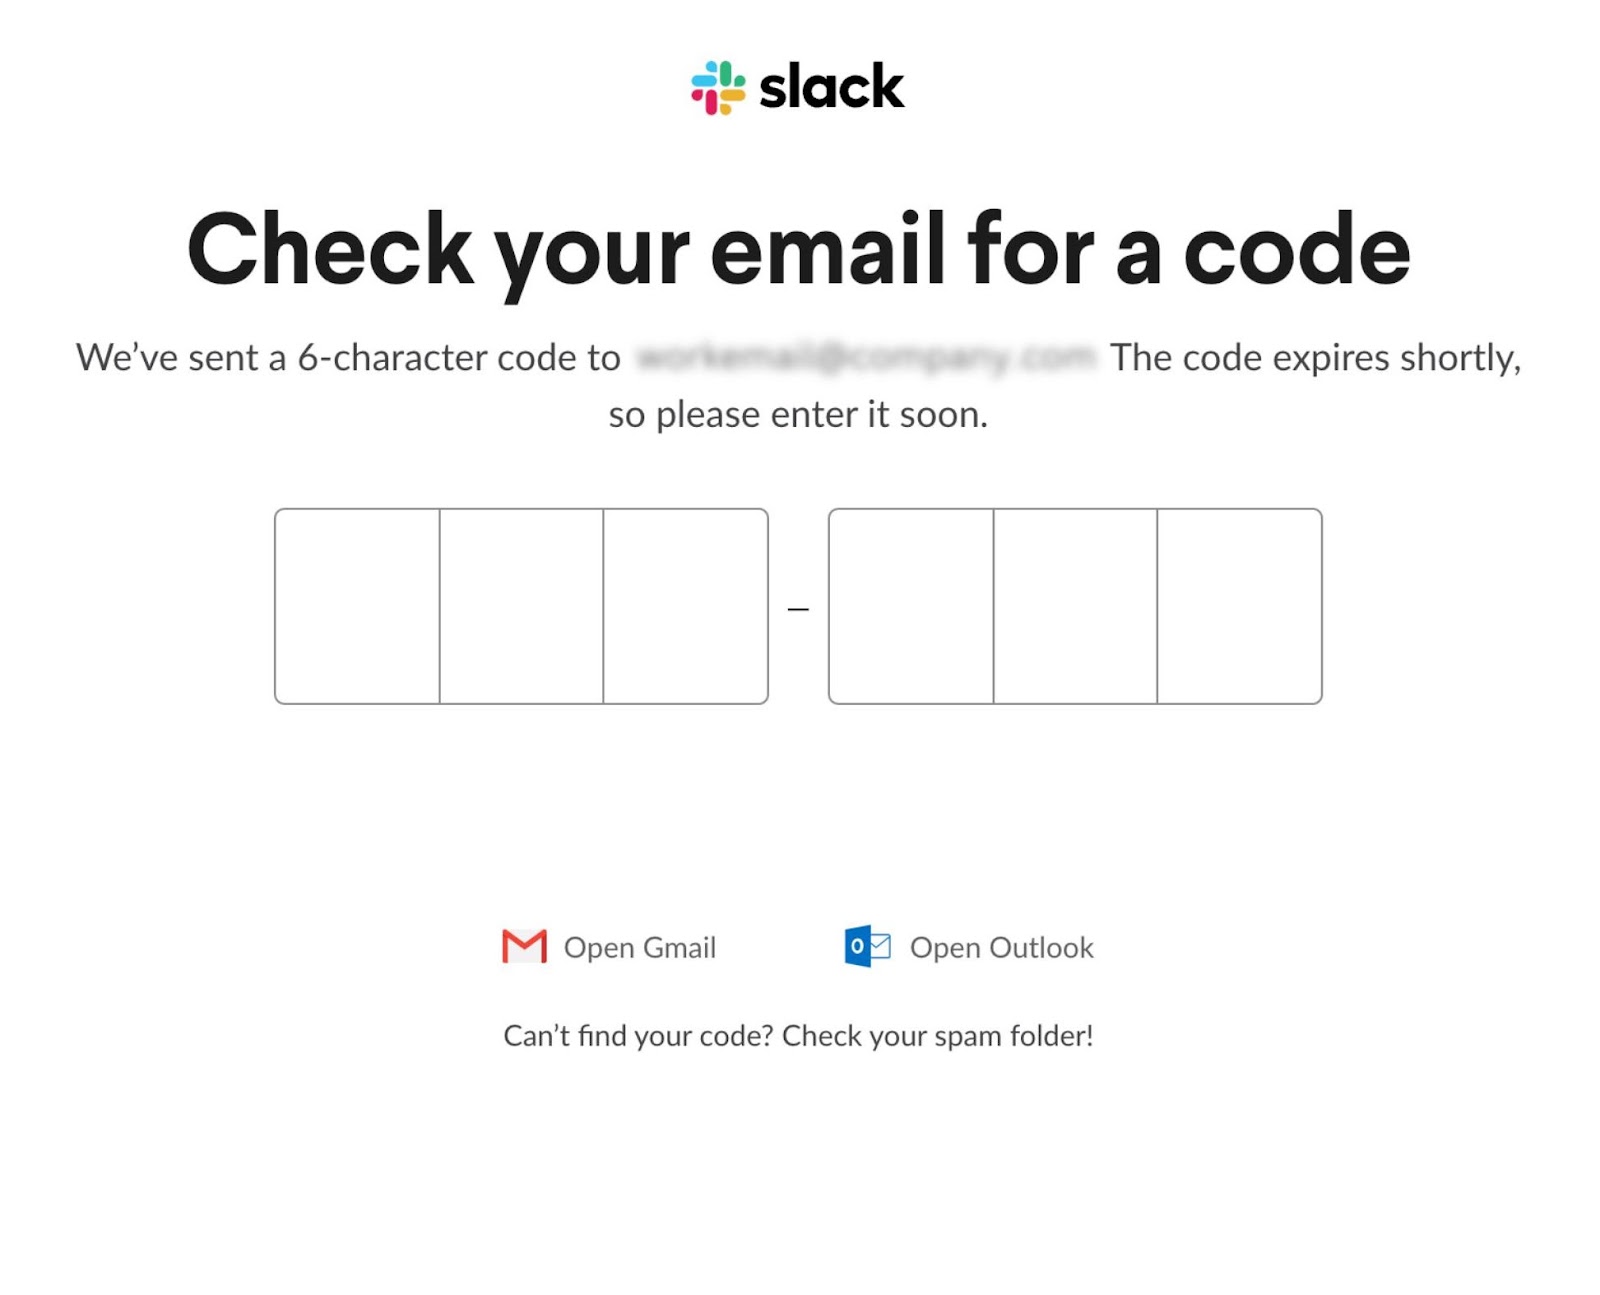 "Check your email for a code" pop up window in Slack